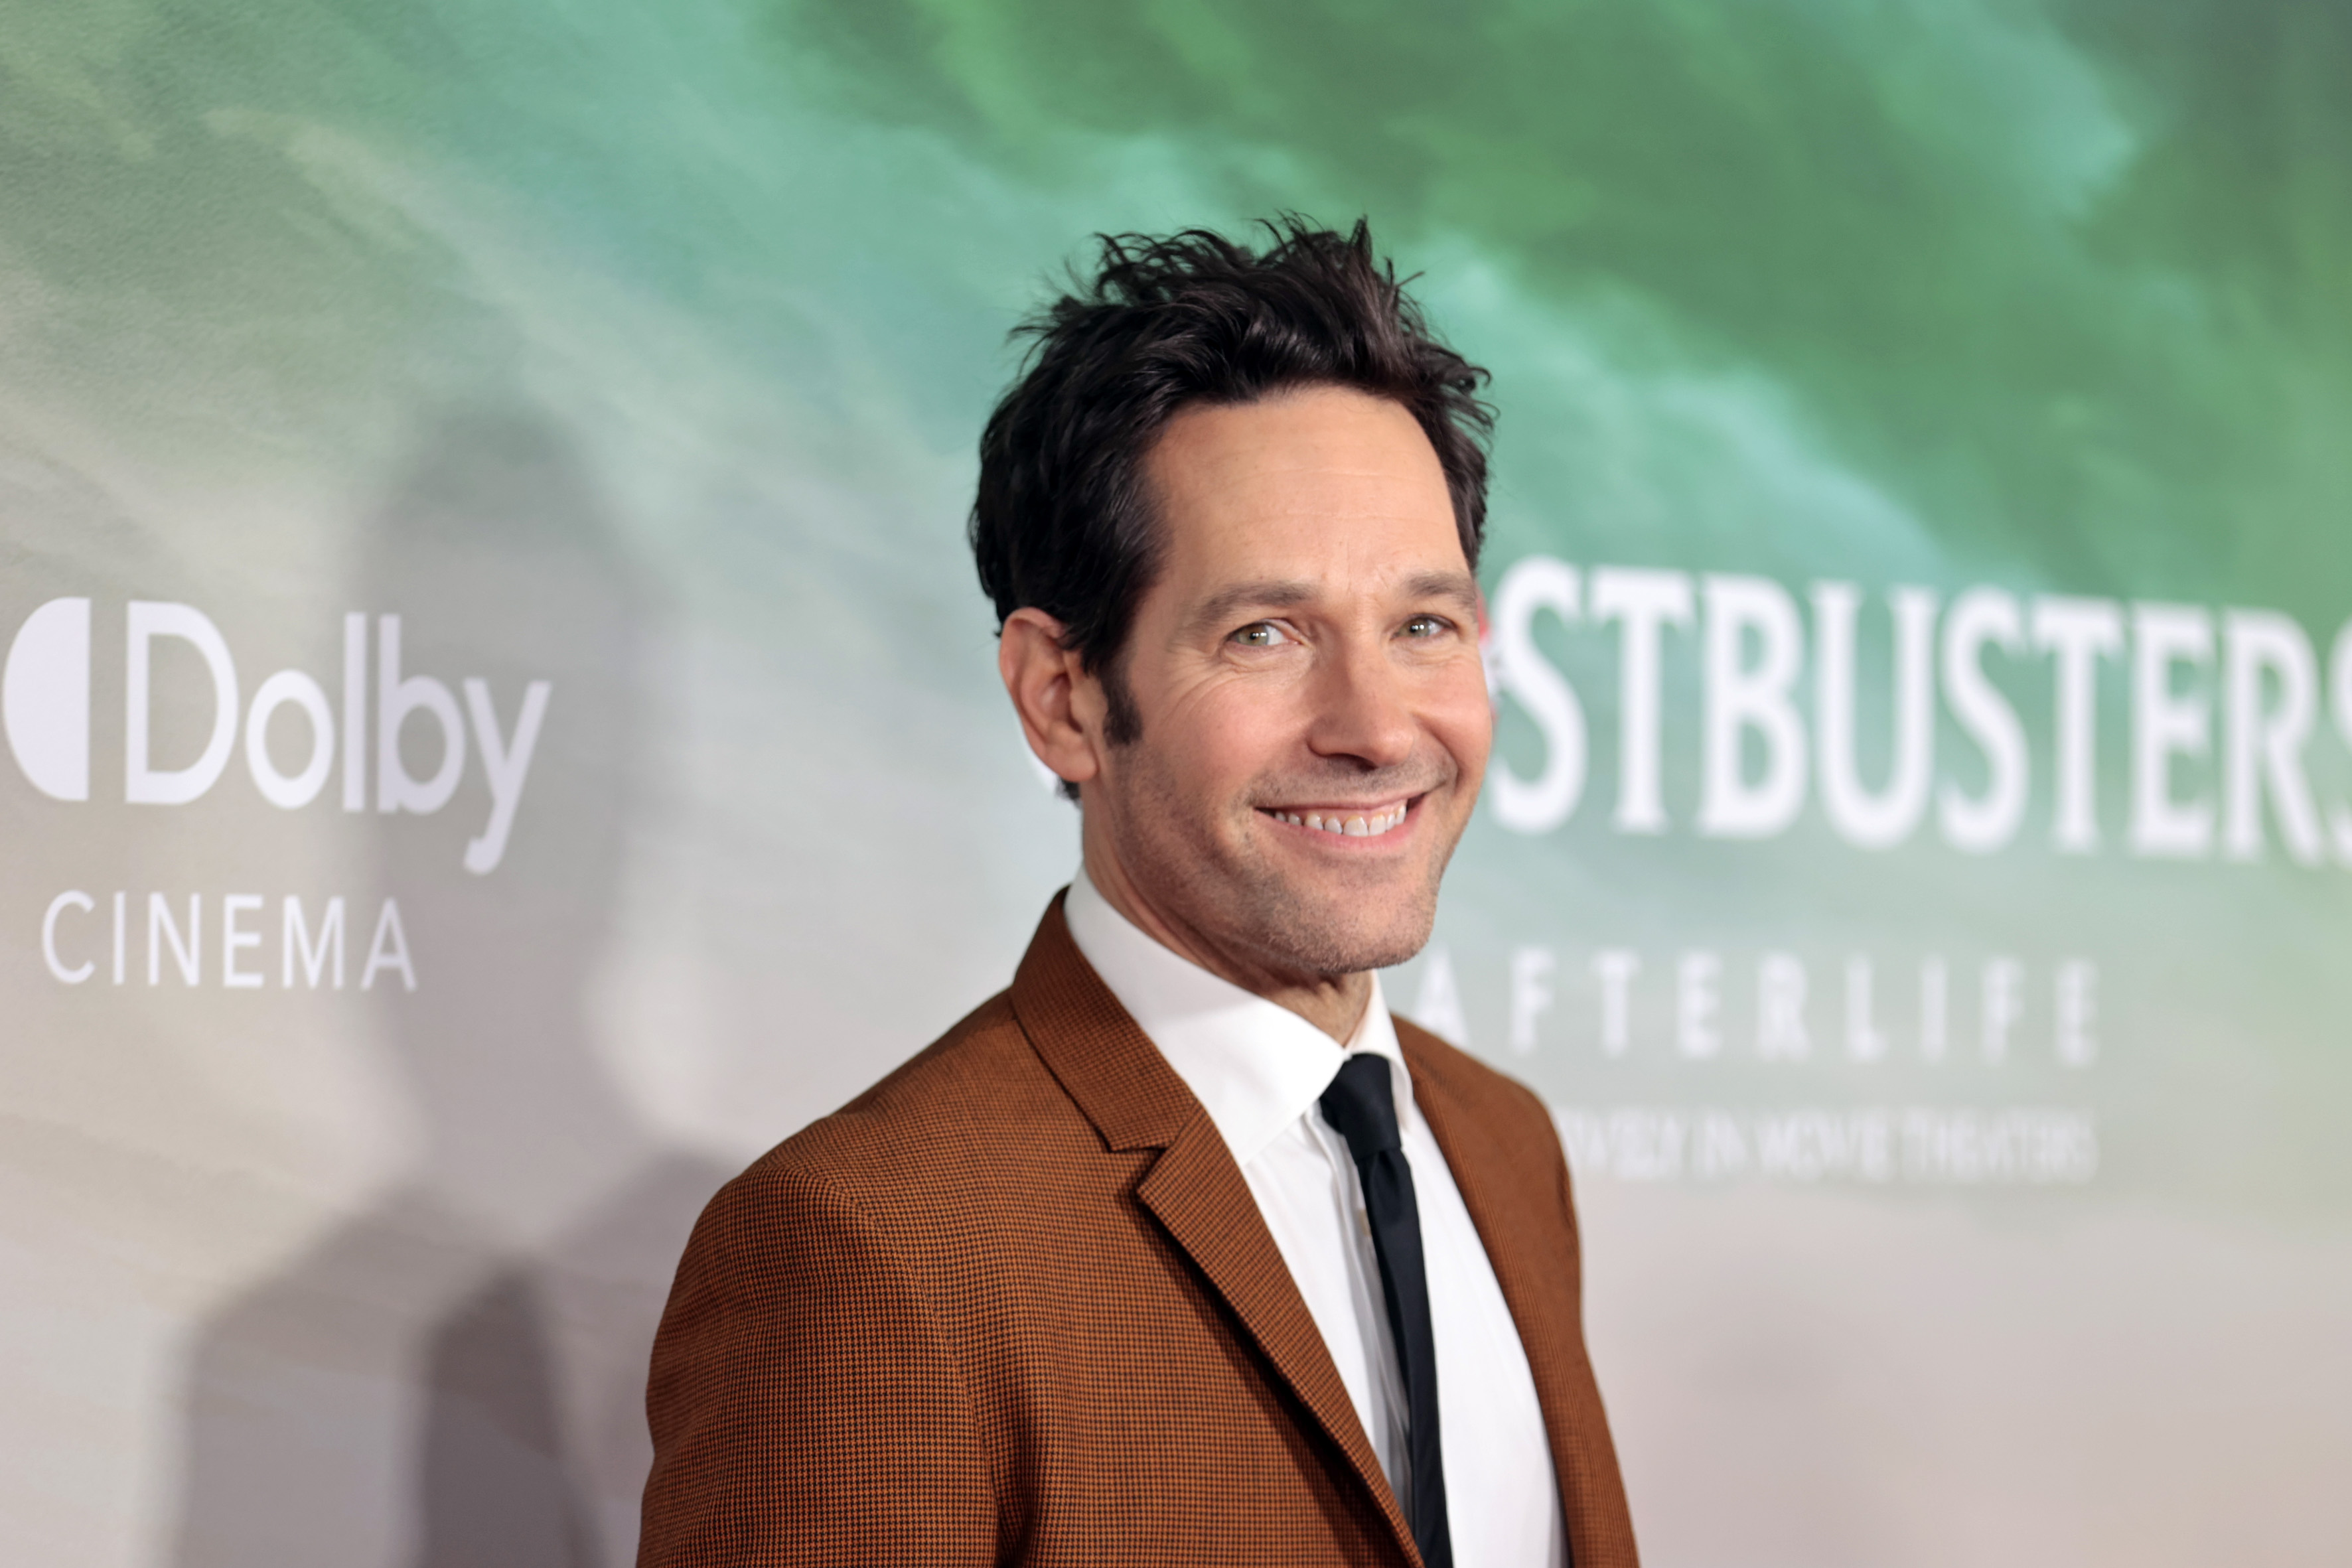 Paul Rudd at the the "Ghostbusters: Afterlife" New York premiere at AMC Lincoln Square Theater on November 15, 2021 | Source: Getty Images